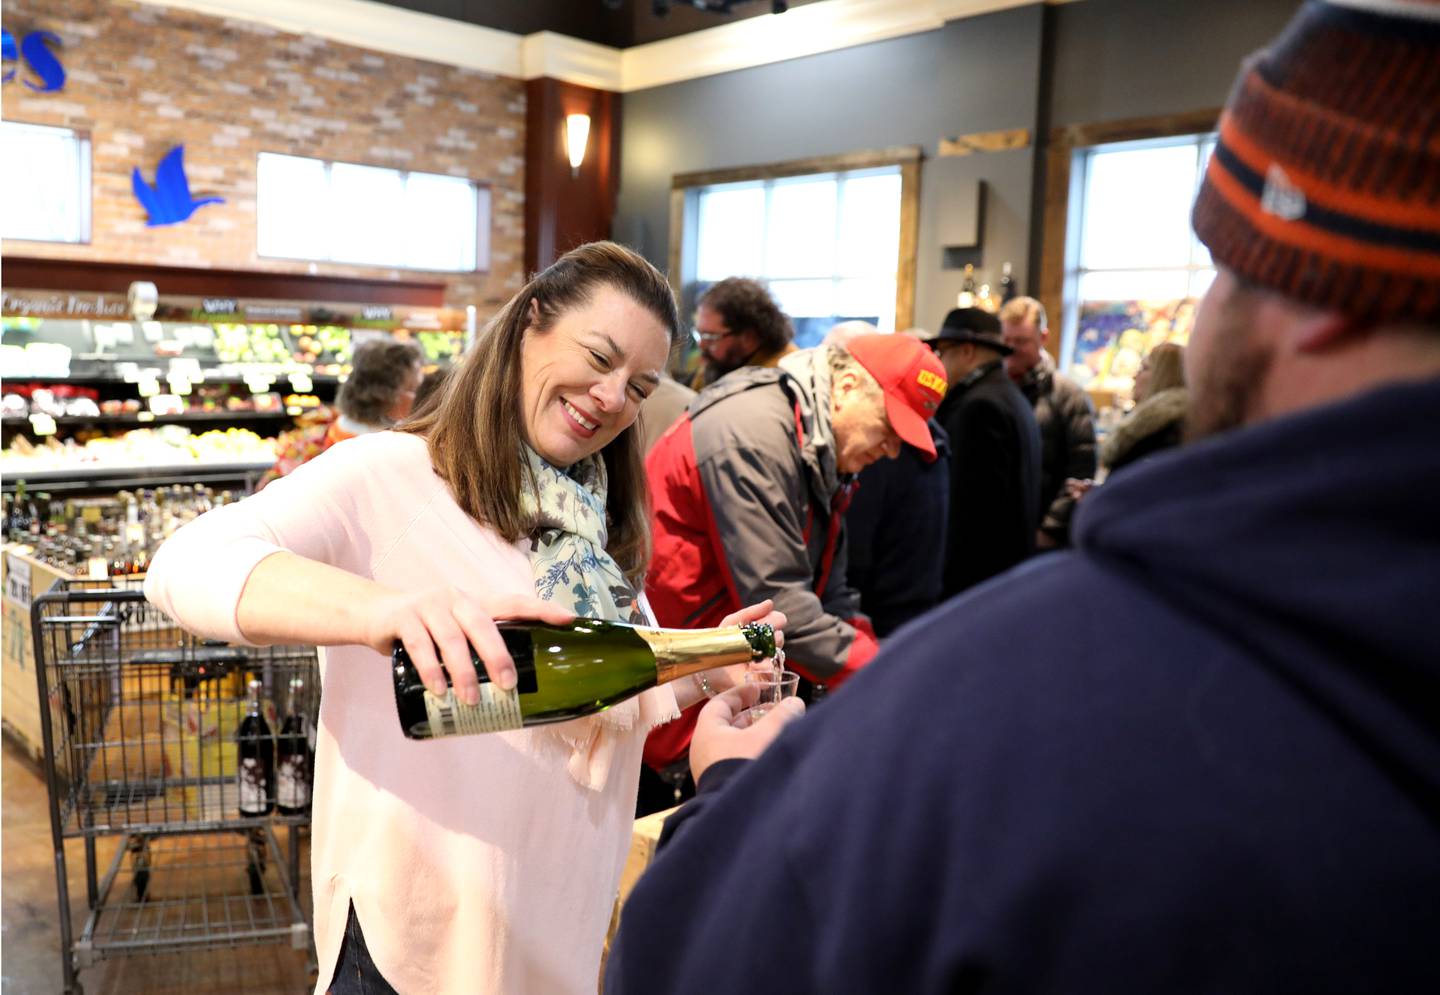 Elizabeth Schuster pours wine during the final wine tasting event at Blue Goose Market in St. Charles on Thursday, Feb. 24, 2022. The store is closing after 90 years in business.